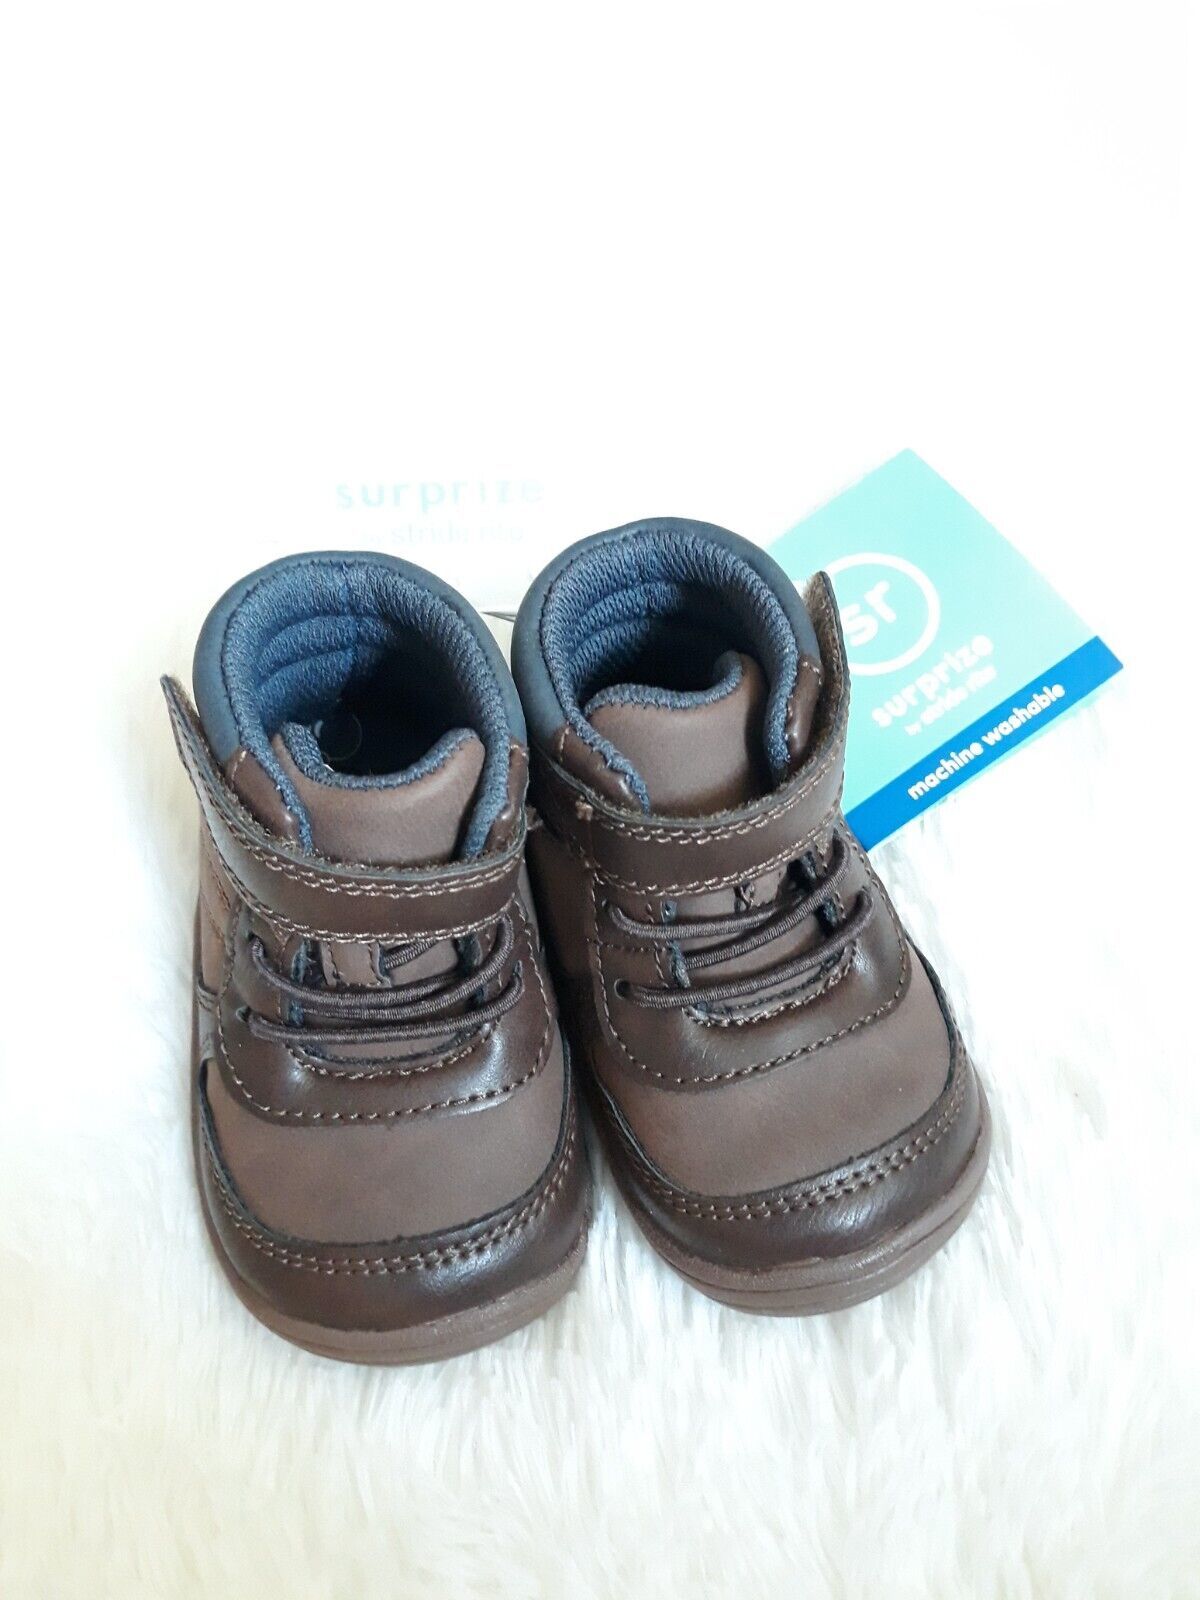 Surprize By Stride Rite Infant "No Tie" Boots Size 3 (Machine washable) - NEW!!! - £11.90 GBP